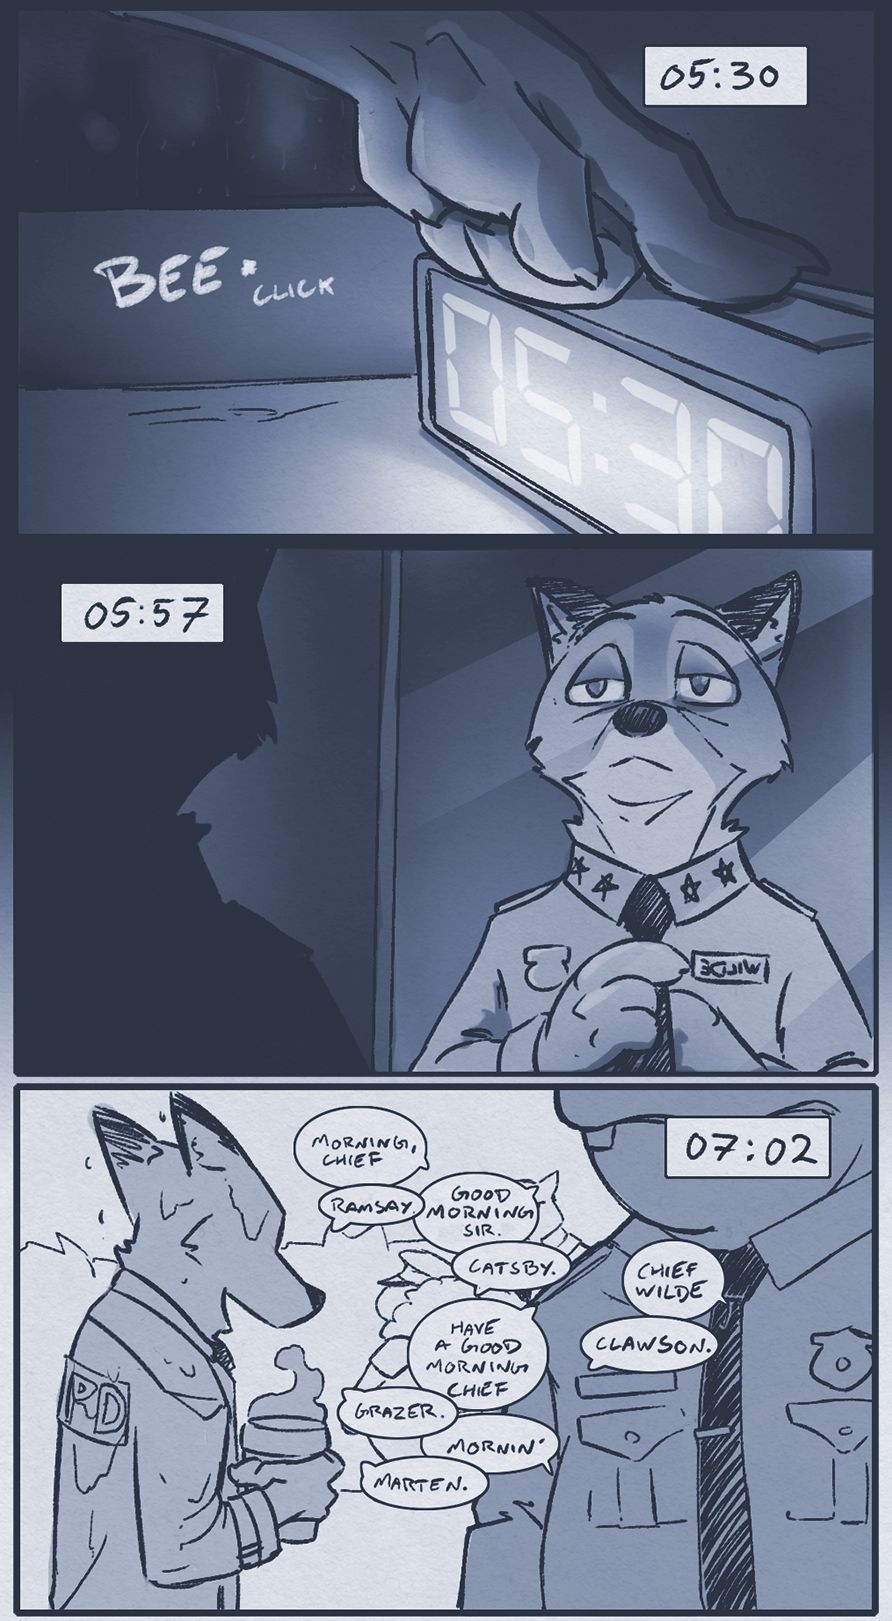 [Mead] Judy is dead AU 4 - The last day (Zootopia) 1